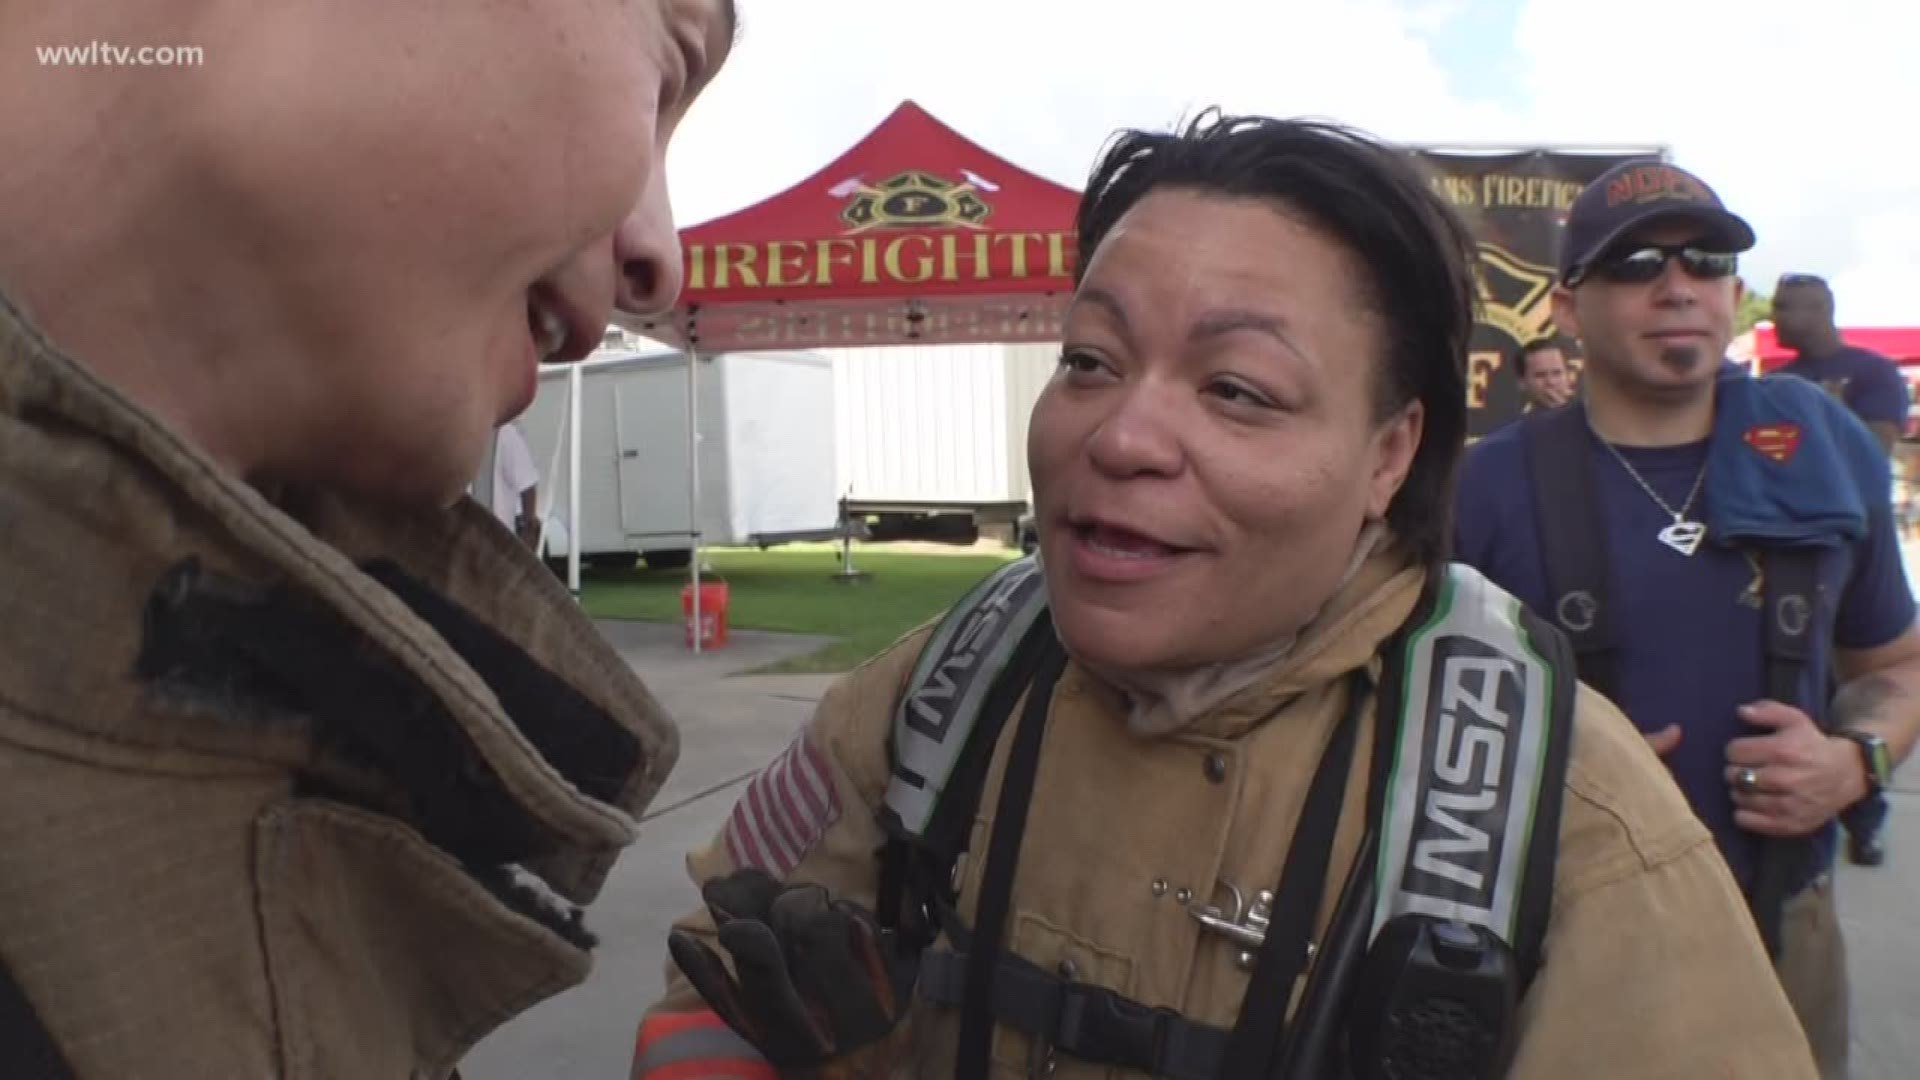 As mayor of the so called "city of yes", Cantrell couldn't necessarily say no when the fire department invited her to put on 70 pounds of gear and enter a fire scenario.  